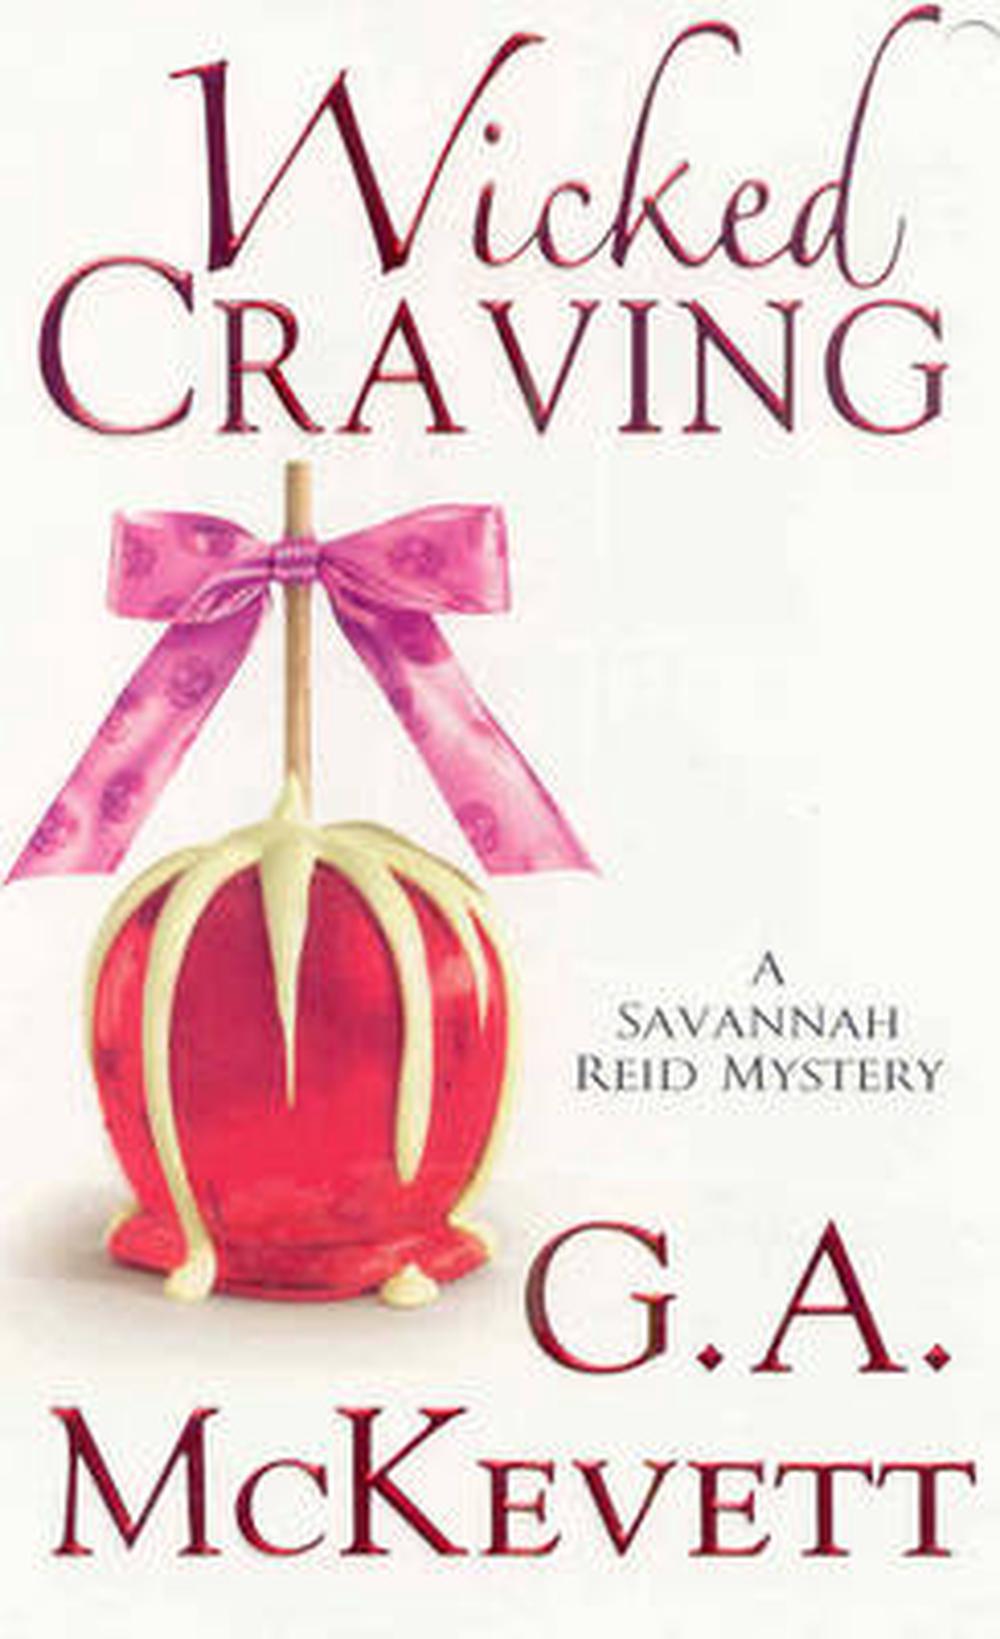 wicked cravings book